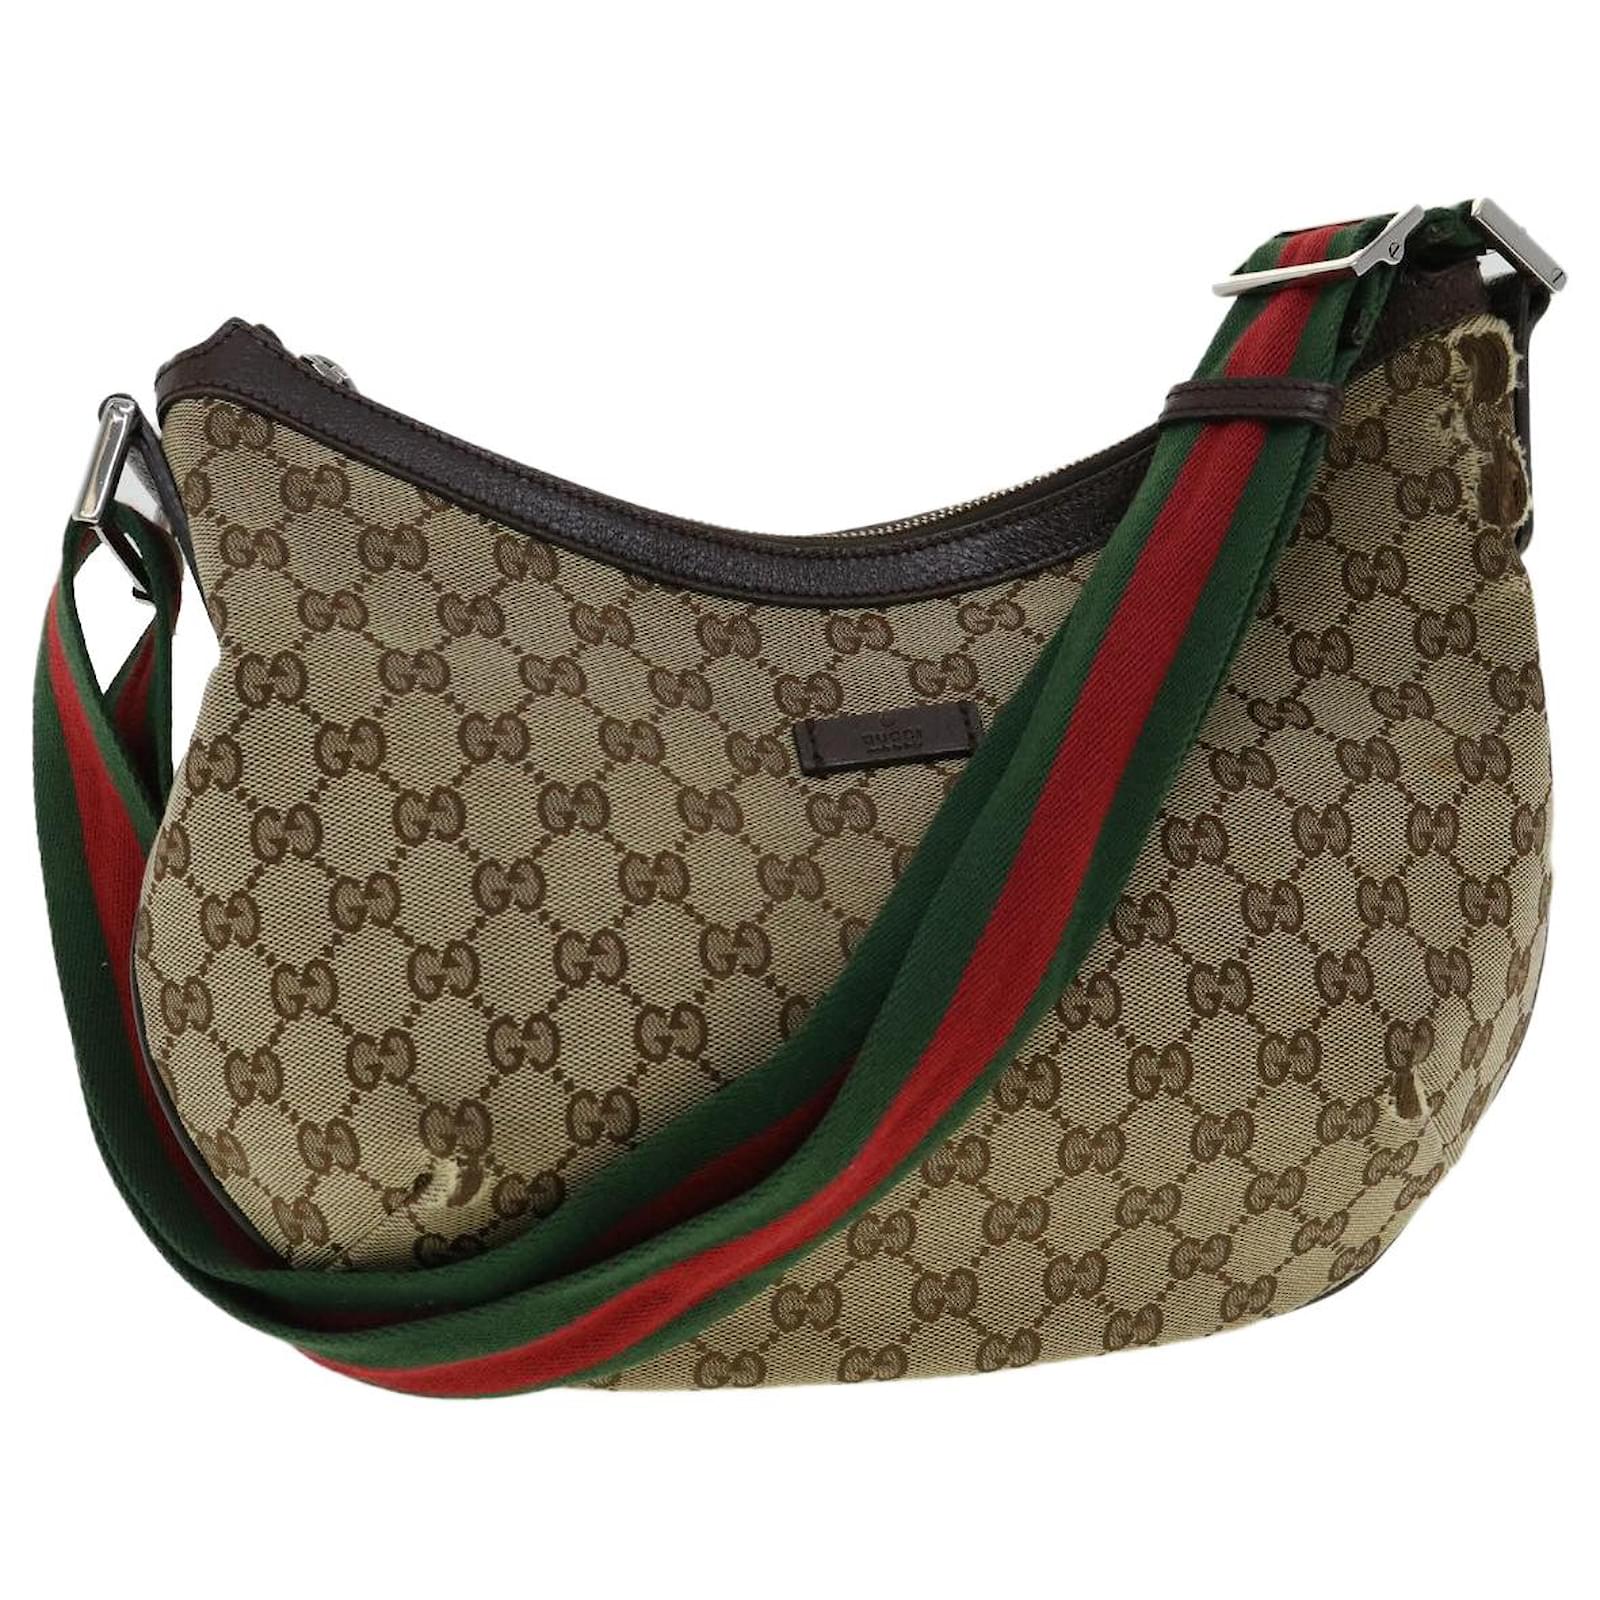 GUCCI-Sherry-GG-Canvas-Leather-Shoulder-Bag-Beige-Red-189749 – dct